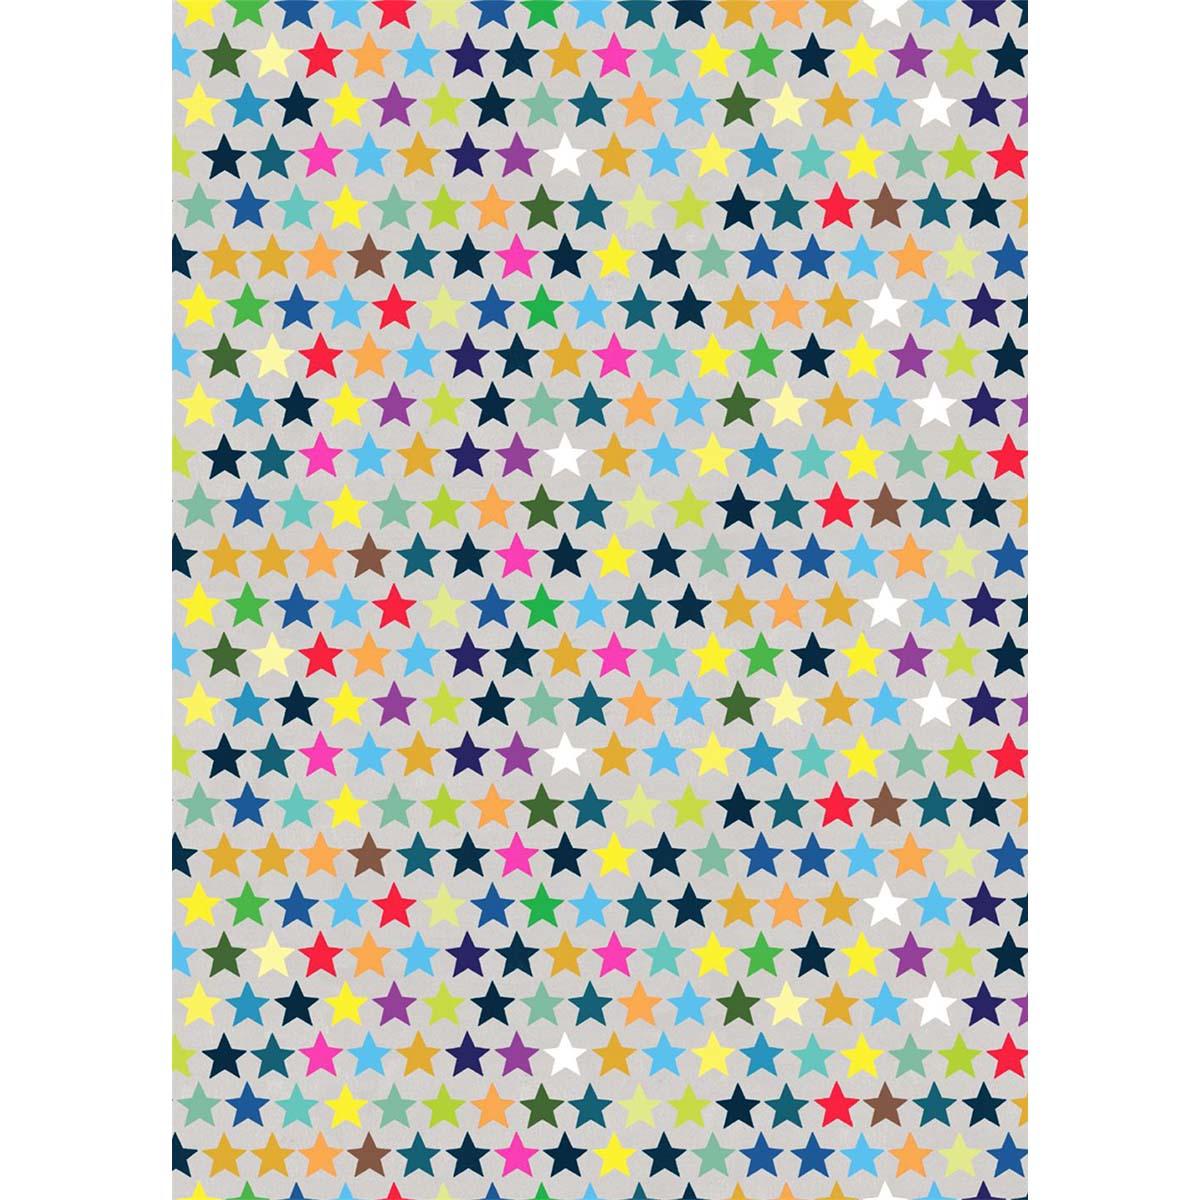 One Sheet Of Stars Themed Wrapping Paper Displayed